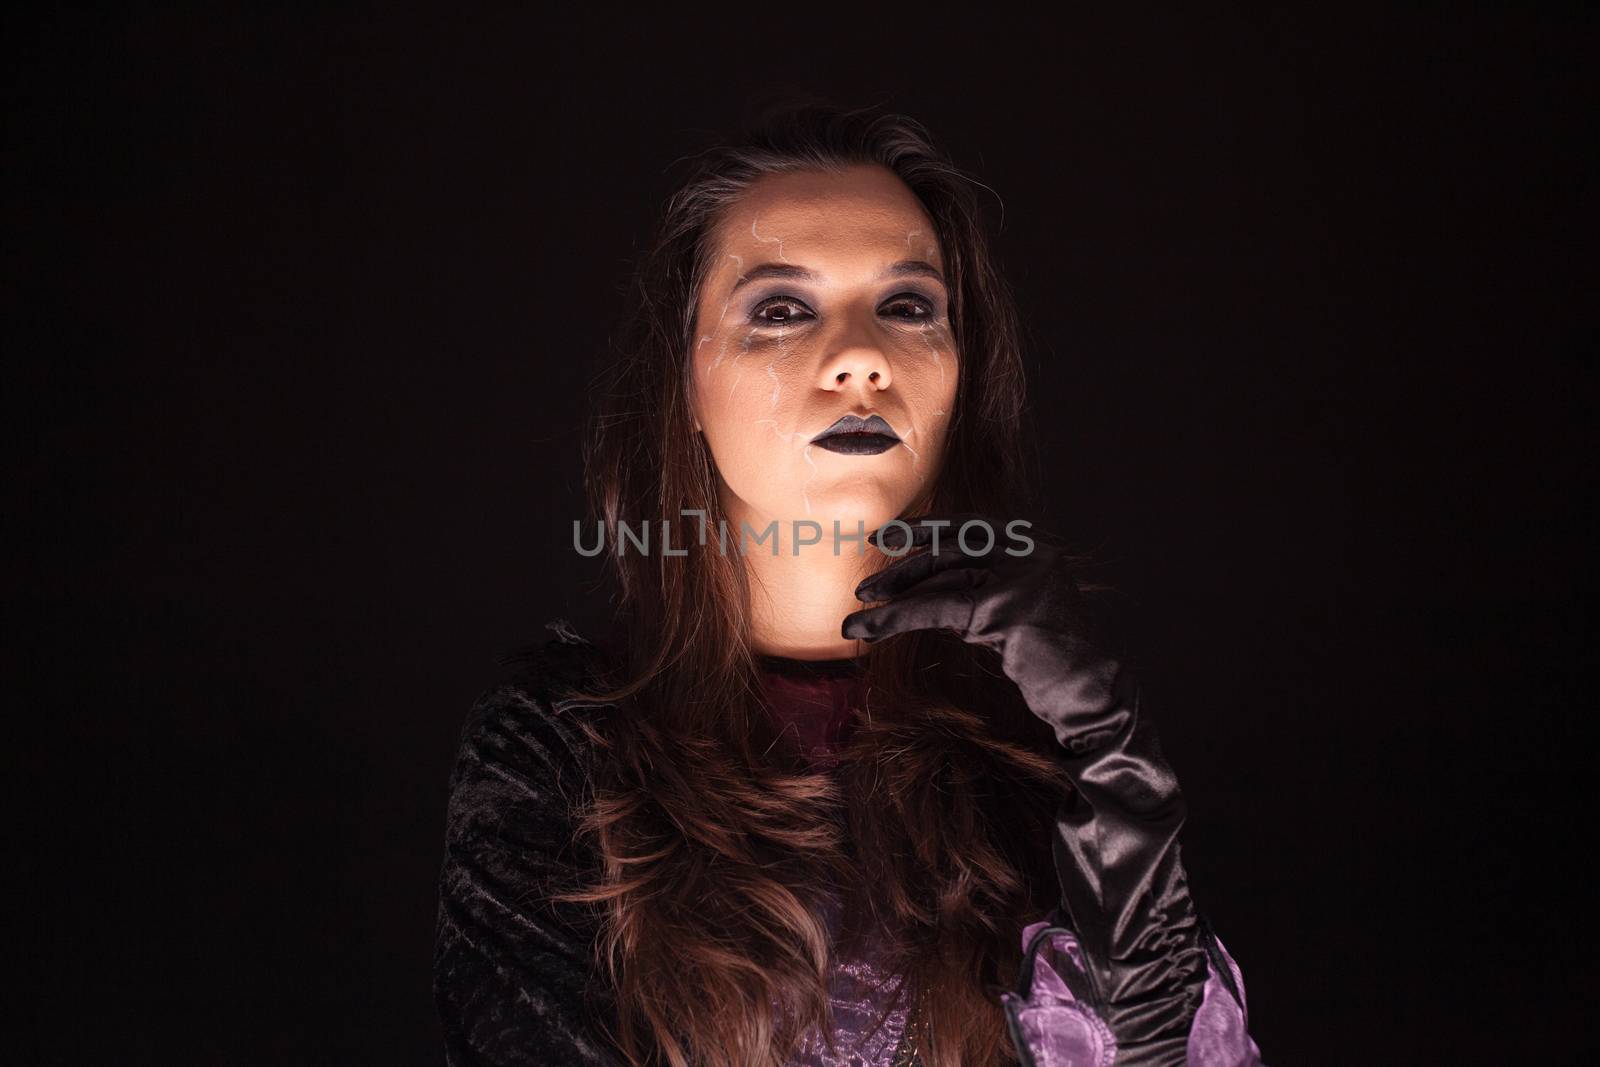 Portrait of beautiful woman dressed up like a witch over black background.